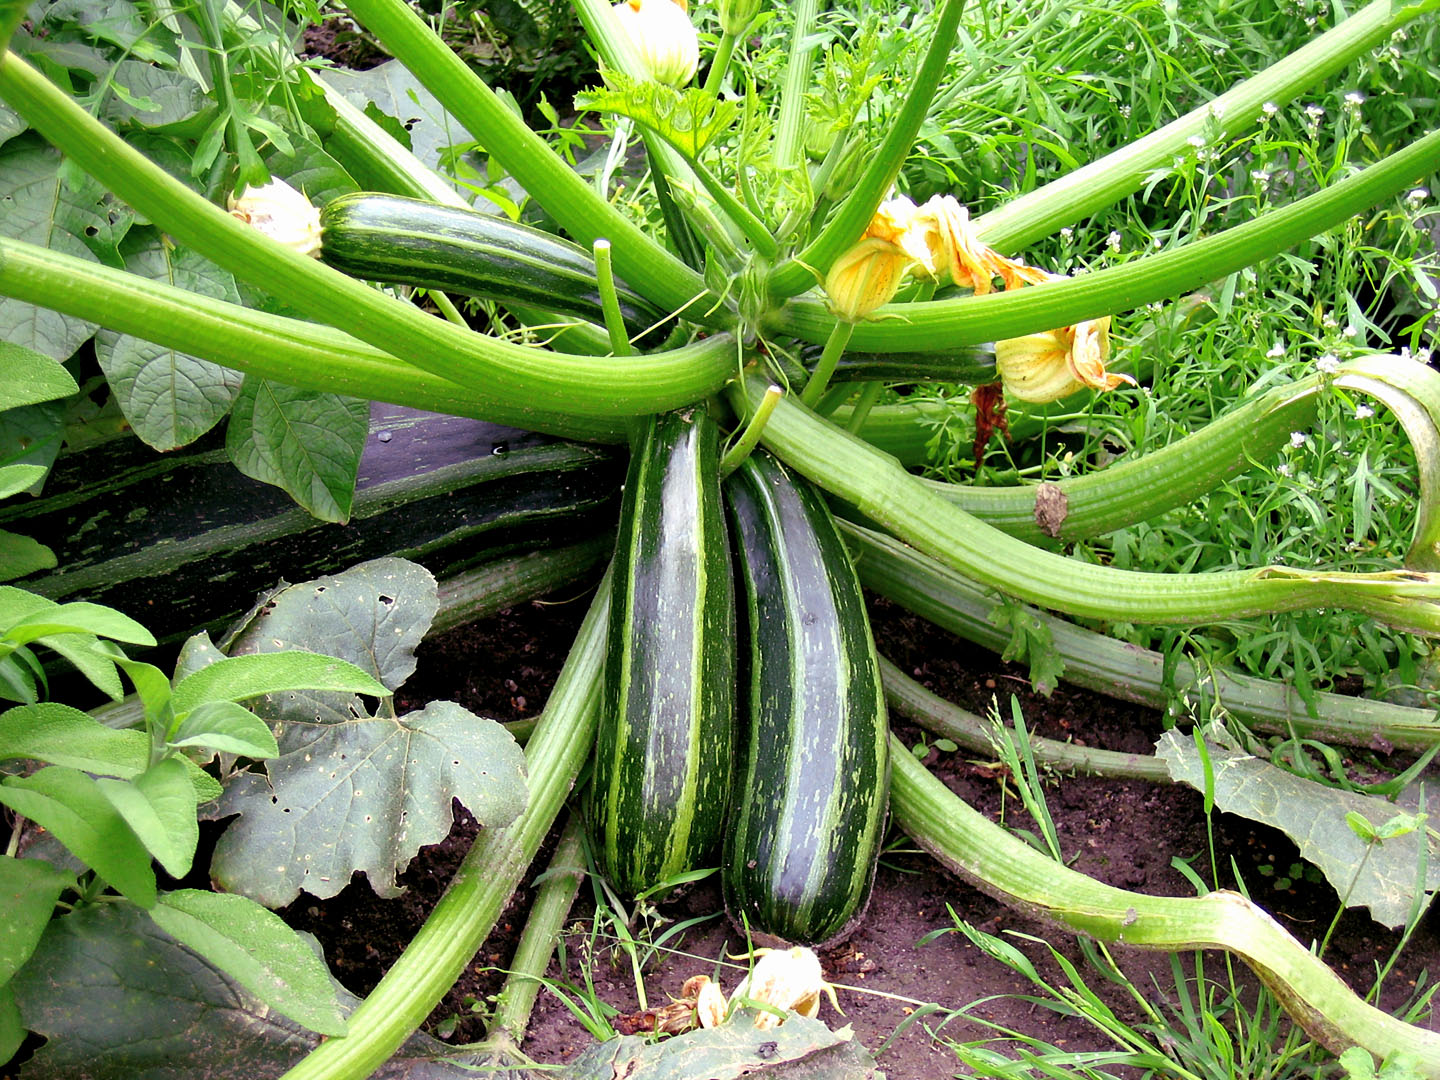 How To Grow Zucchini In Pots: 7 Useful Tips